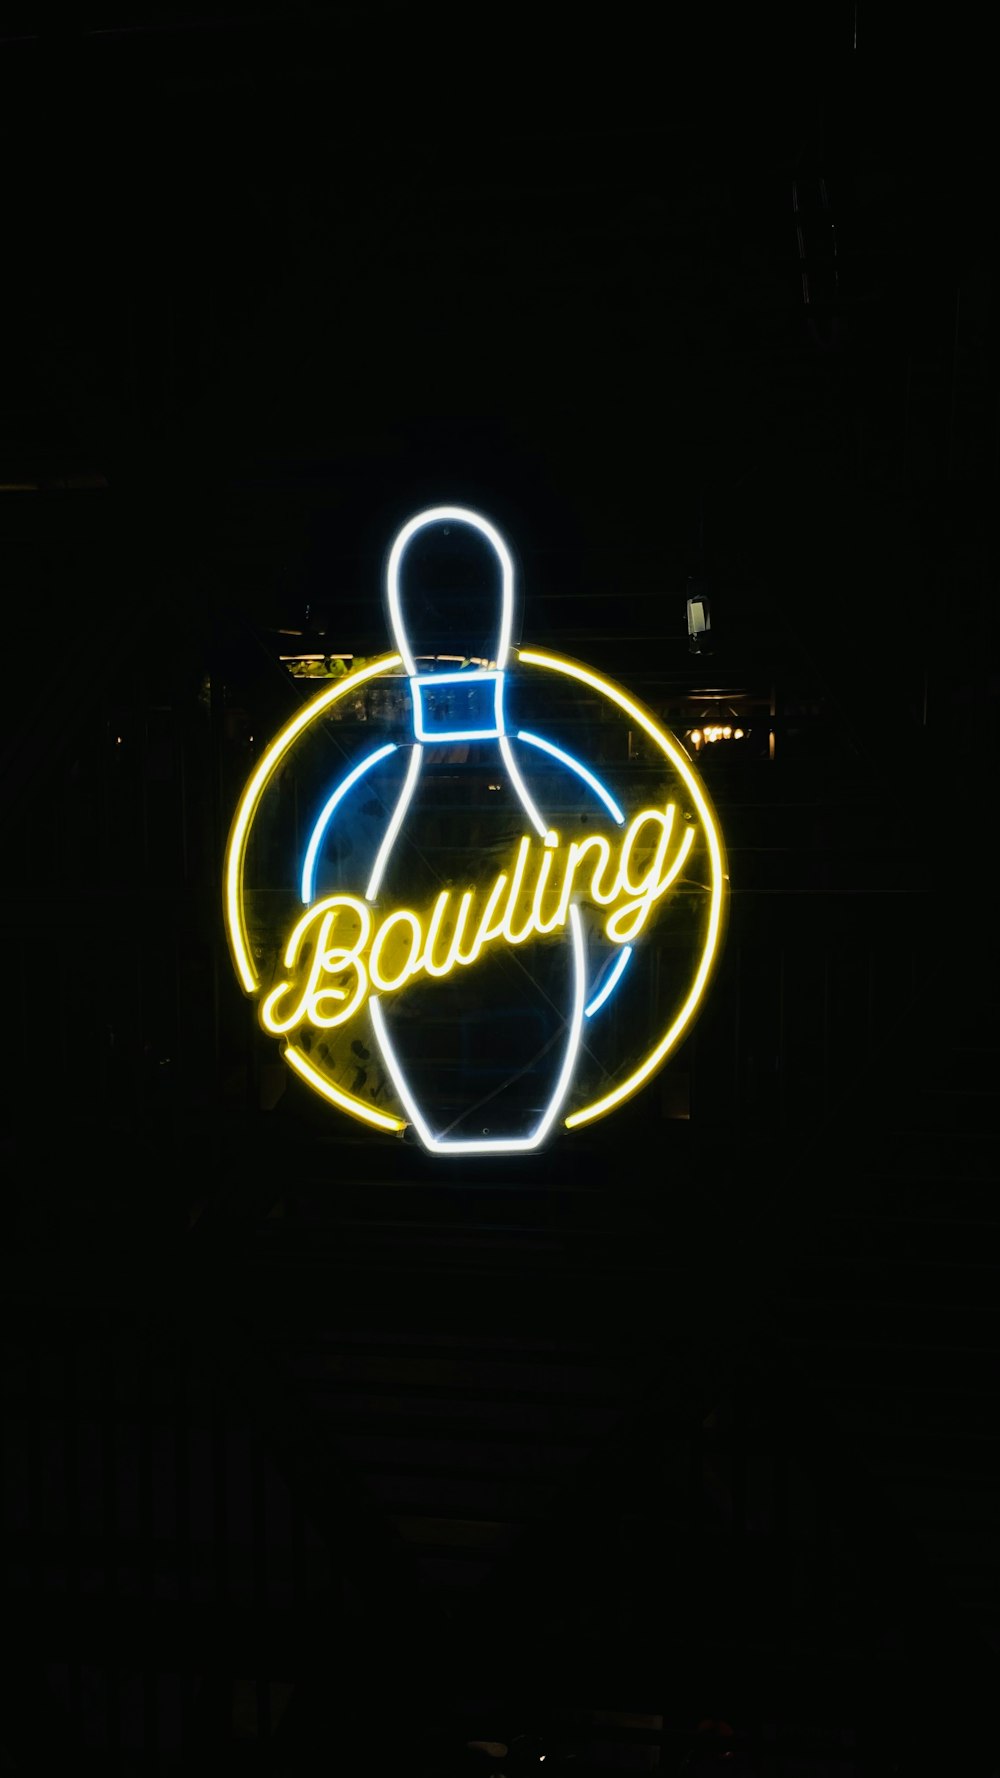 a neon bowling sign lit up in the dark